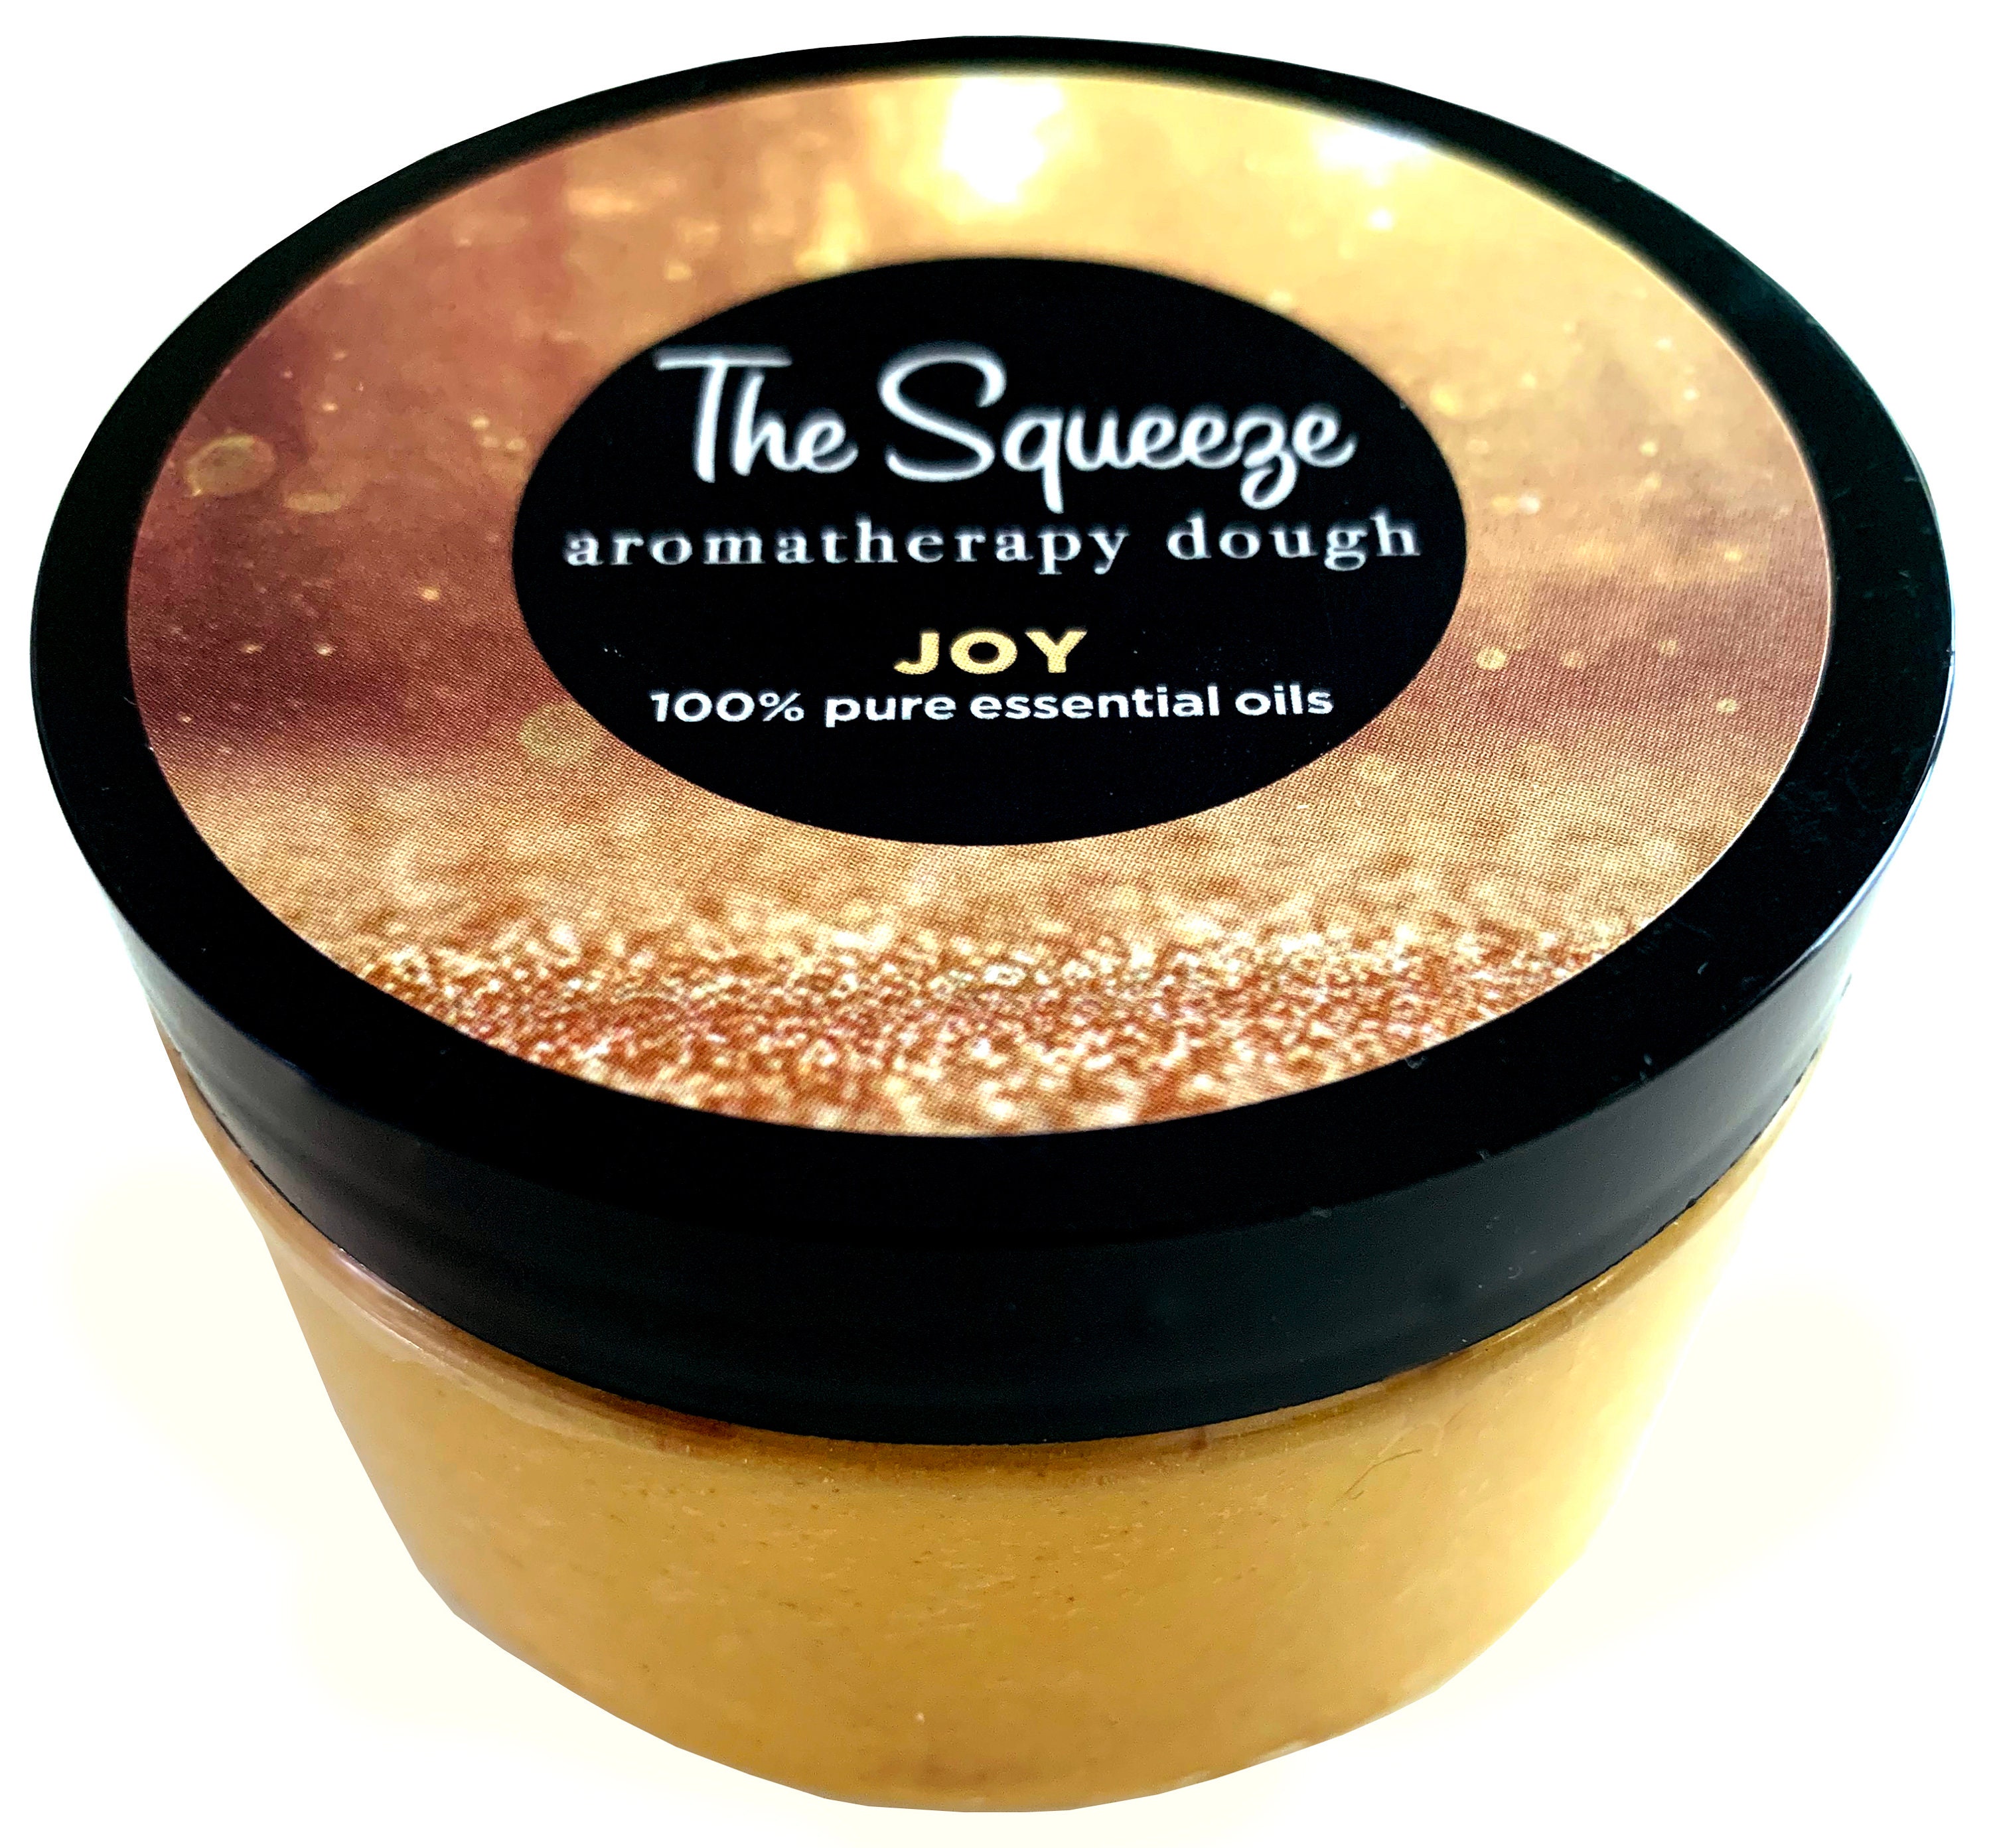 The Squeeze - Joy Blend Citrus, Spice & Fennel 100% Essential Oil Stress Relief Therapy Dough, Ball, Aromatherapy Putty